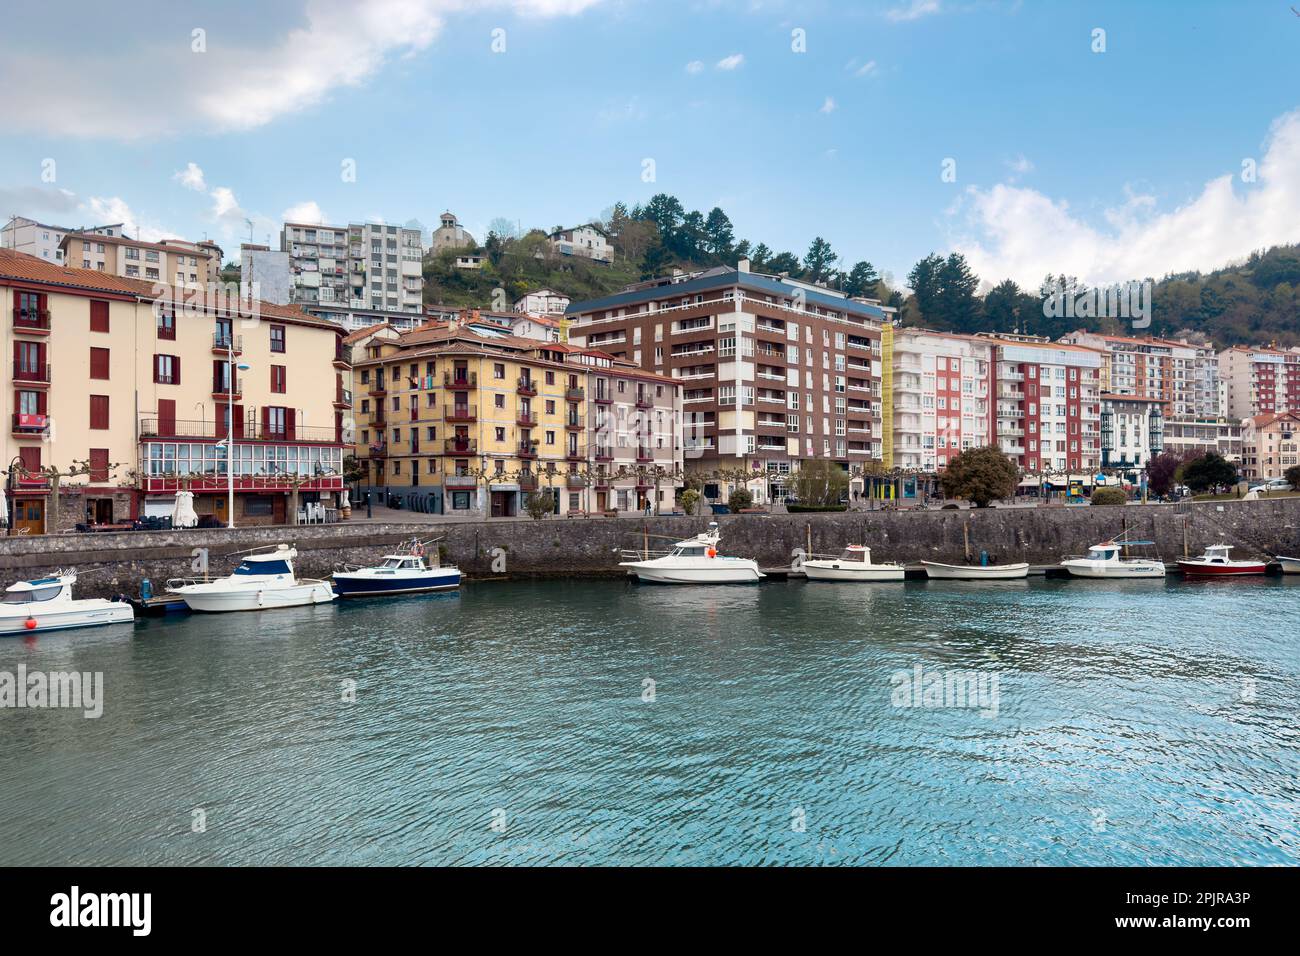 Beautiful old town Ondarroa in Basque country, Spain. High quality photography Stock Photo